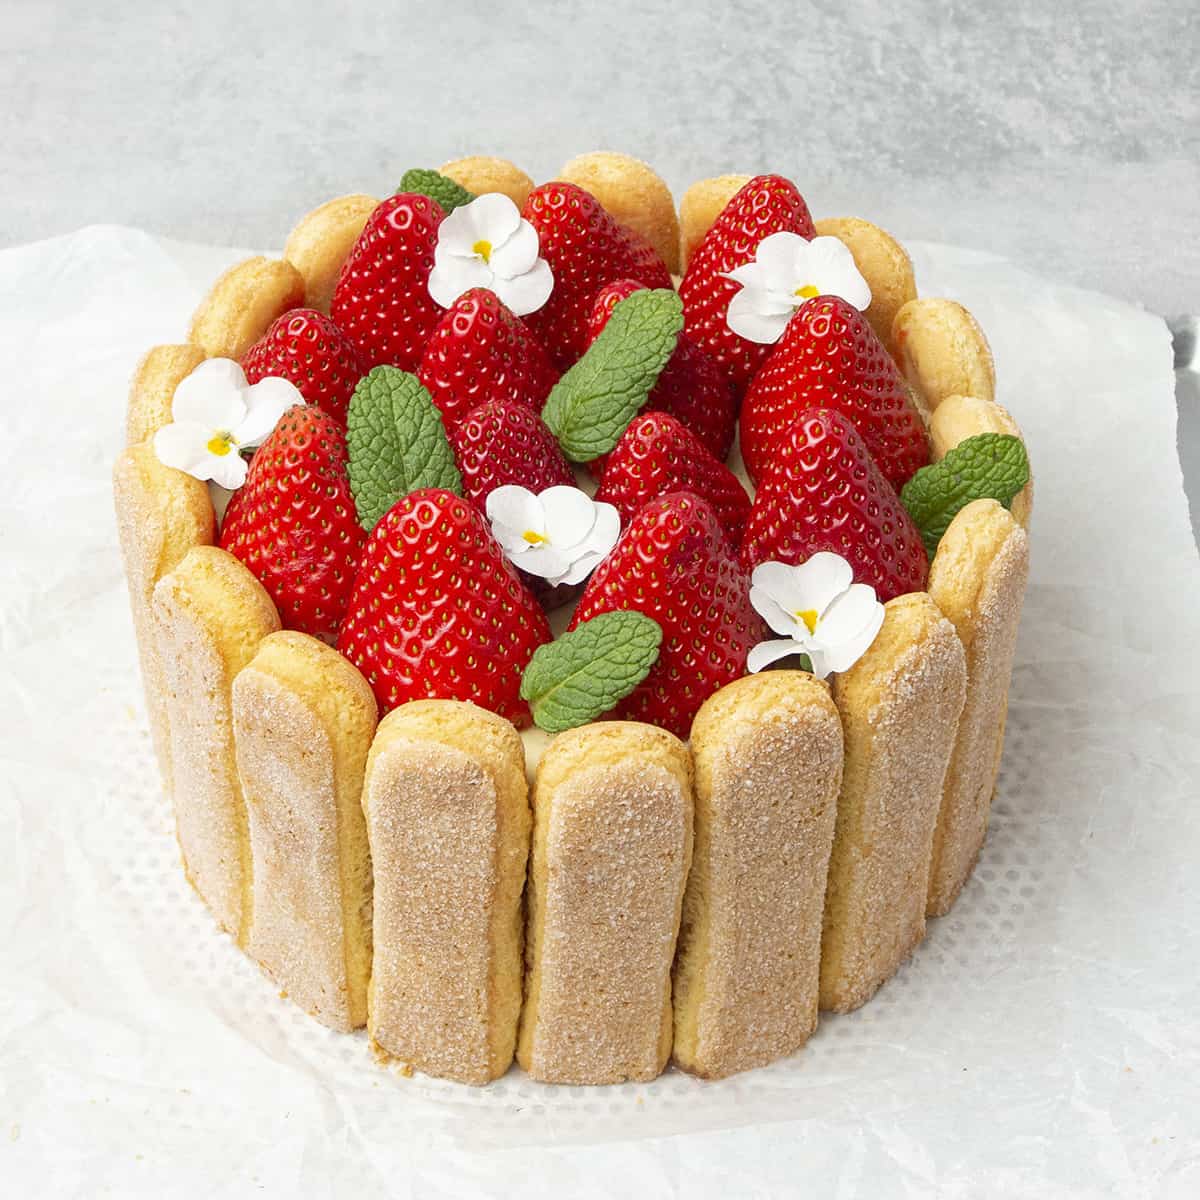 <p>Making this showstopper French <a href="https://www.spatuladesserts.com/strawberry-charlotte-cake/">Charlotte cake</a> is so simple. It is, in fact, just layers of fluffy ladyfingers, vanilla-flavored créme mousseline, and Spring berries. As you’ll see, the elements of Charlotte cake are very easy, but it certainly looks very impressive. Sort of a strawberry tiramisu with creamy vanilla filling!</p>